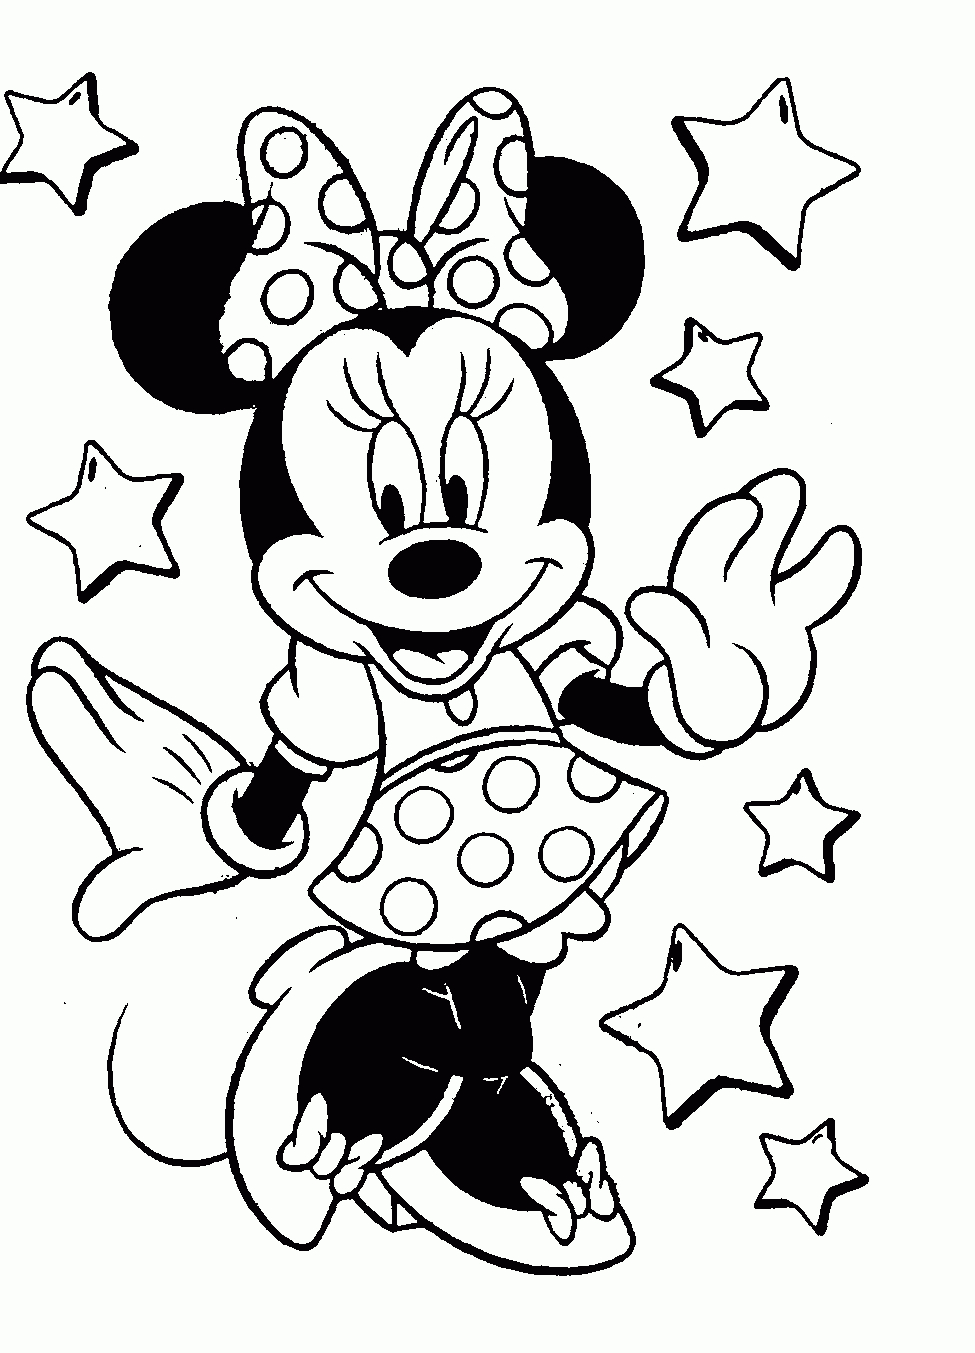 Free Disney Coloring Pages. All In One Place, Much Faster Than - Free Printable Coloring Pages Of Disney Characters